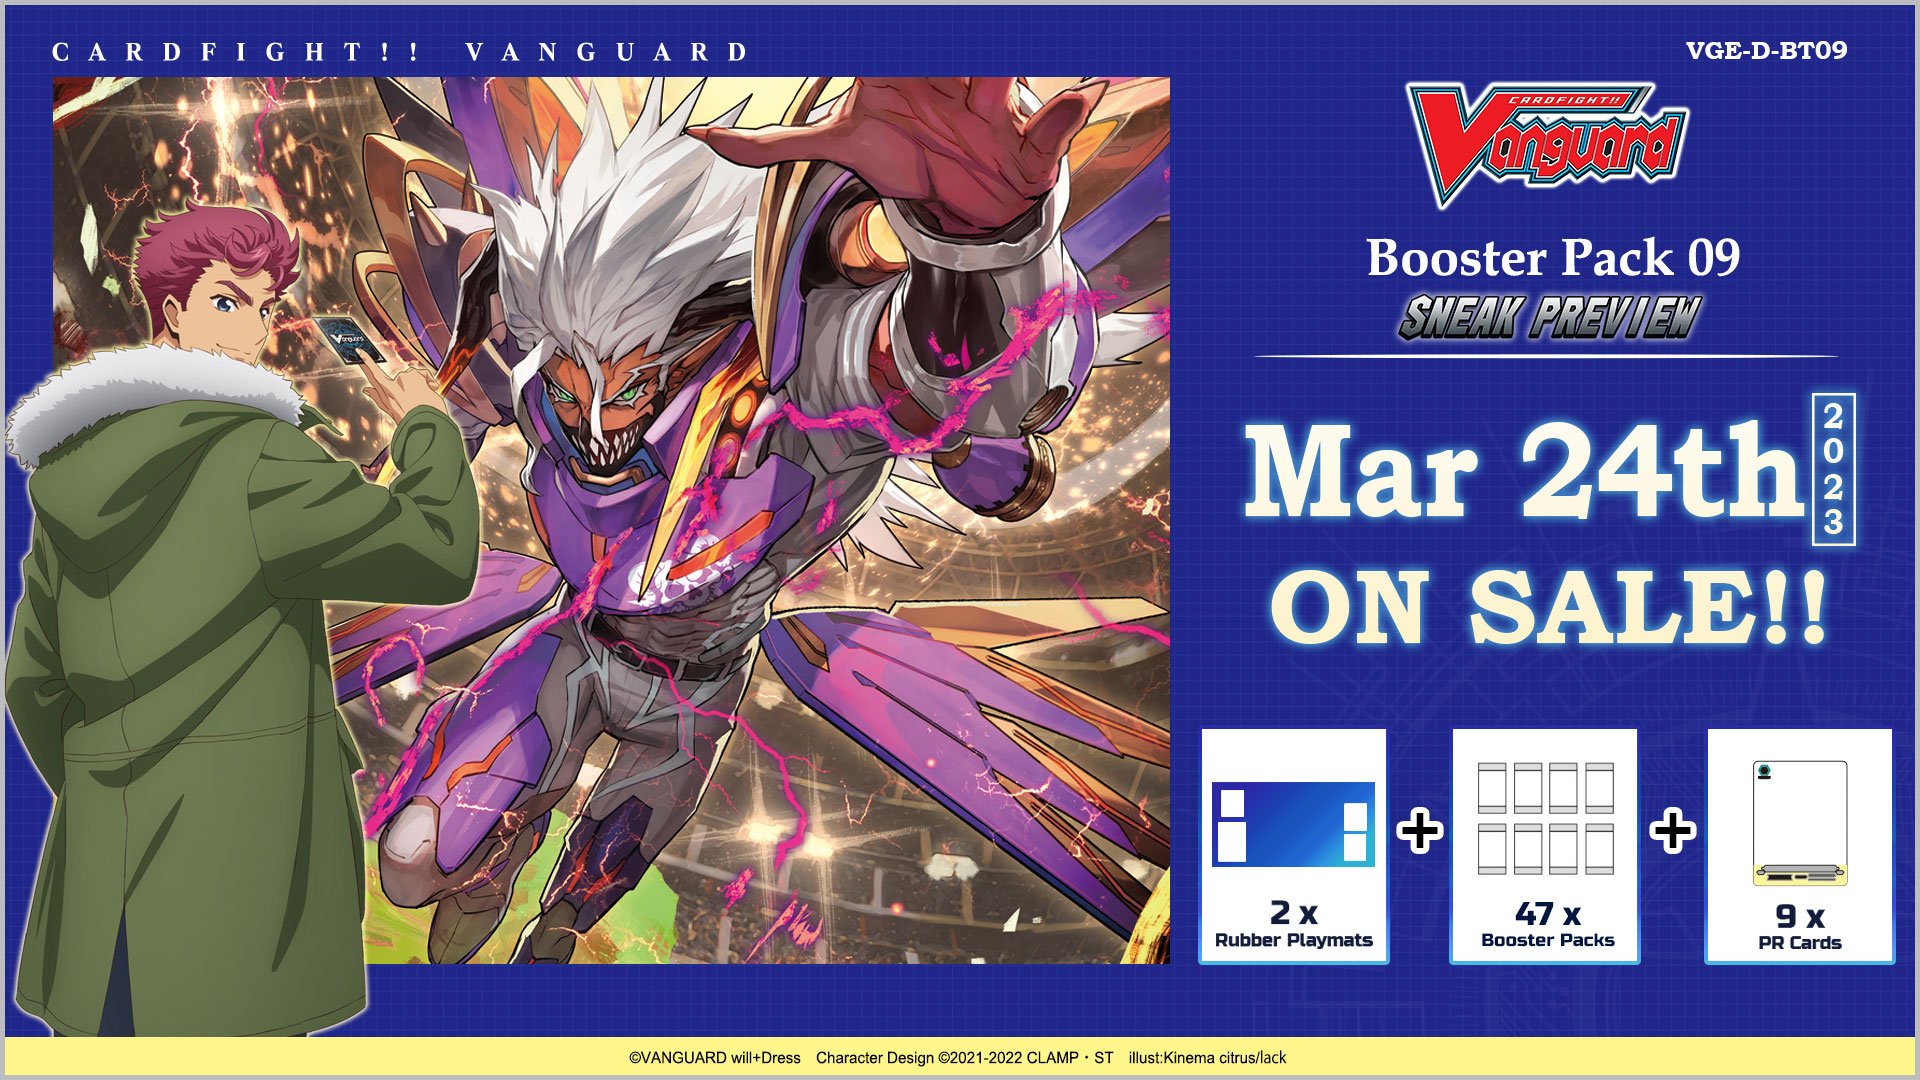 Cardfight!! Vanguard Booster Pack 09: Dragontree Invasion Sneak Preview